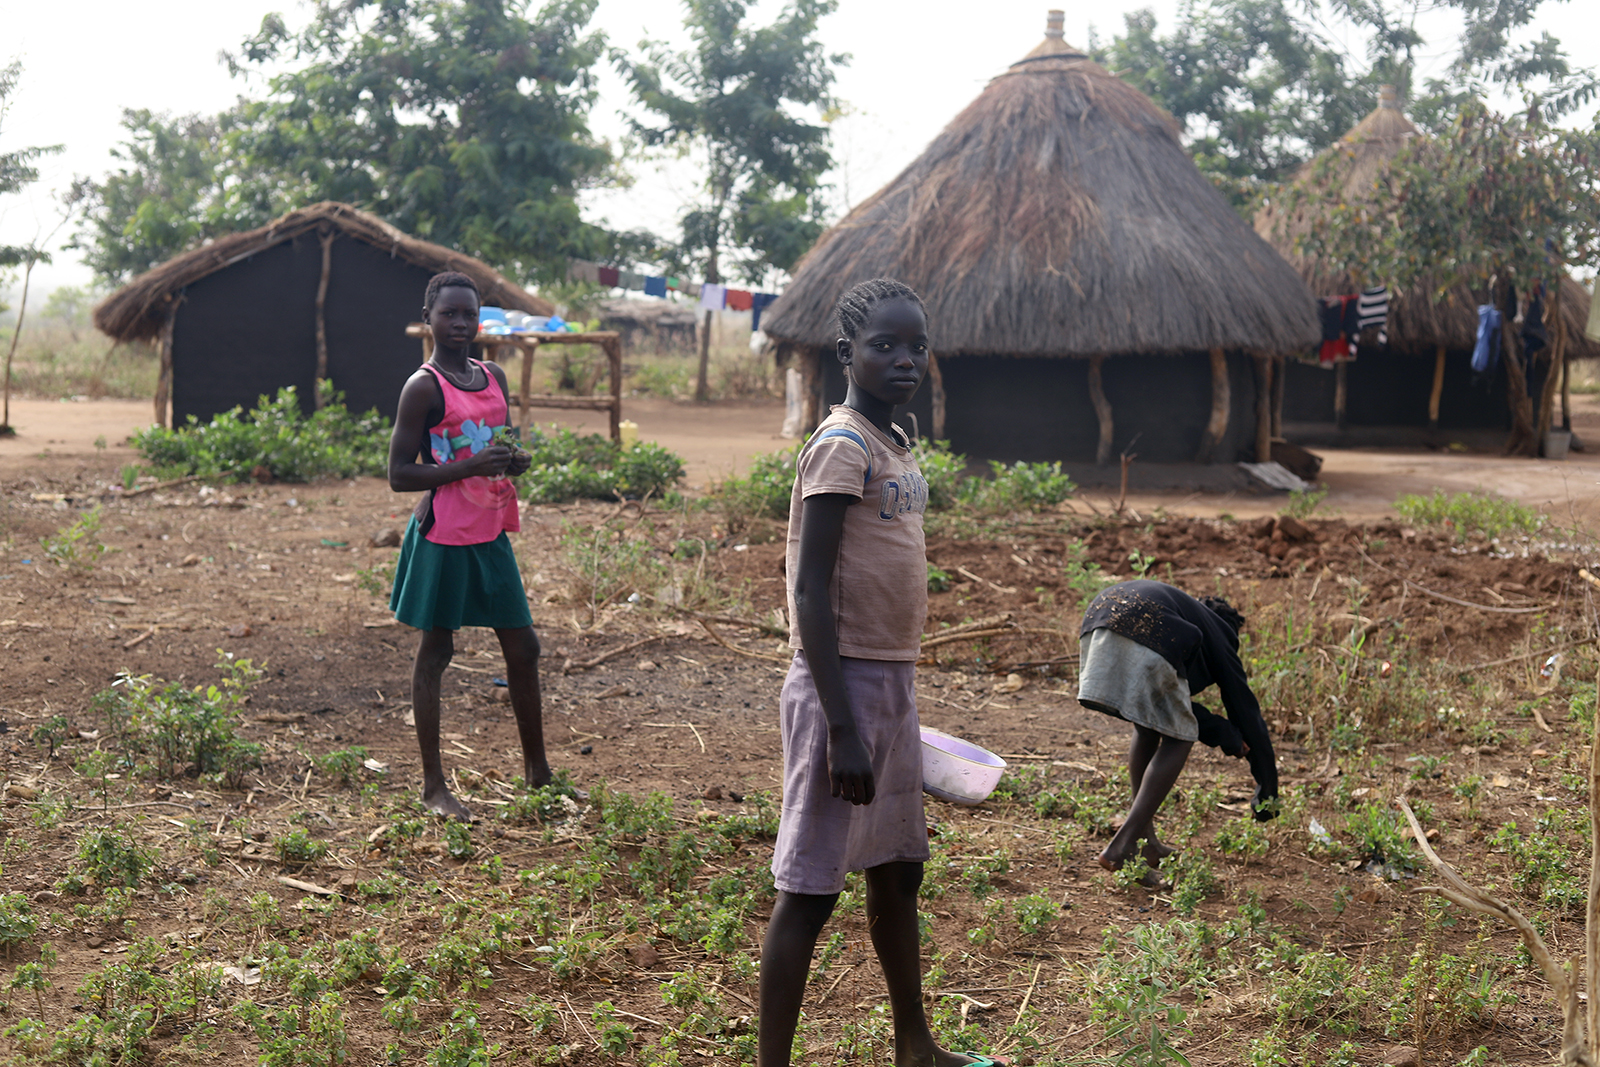 South Sudanese refugees pick vegetables in the garden at an Internally Displaced Peoples camp near Malakal, in northern South Sudan. Photo by Tonny Onyulo